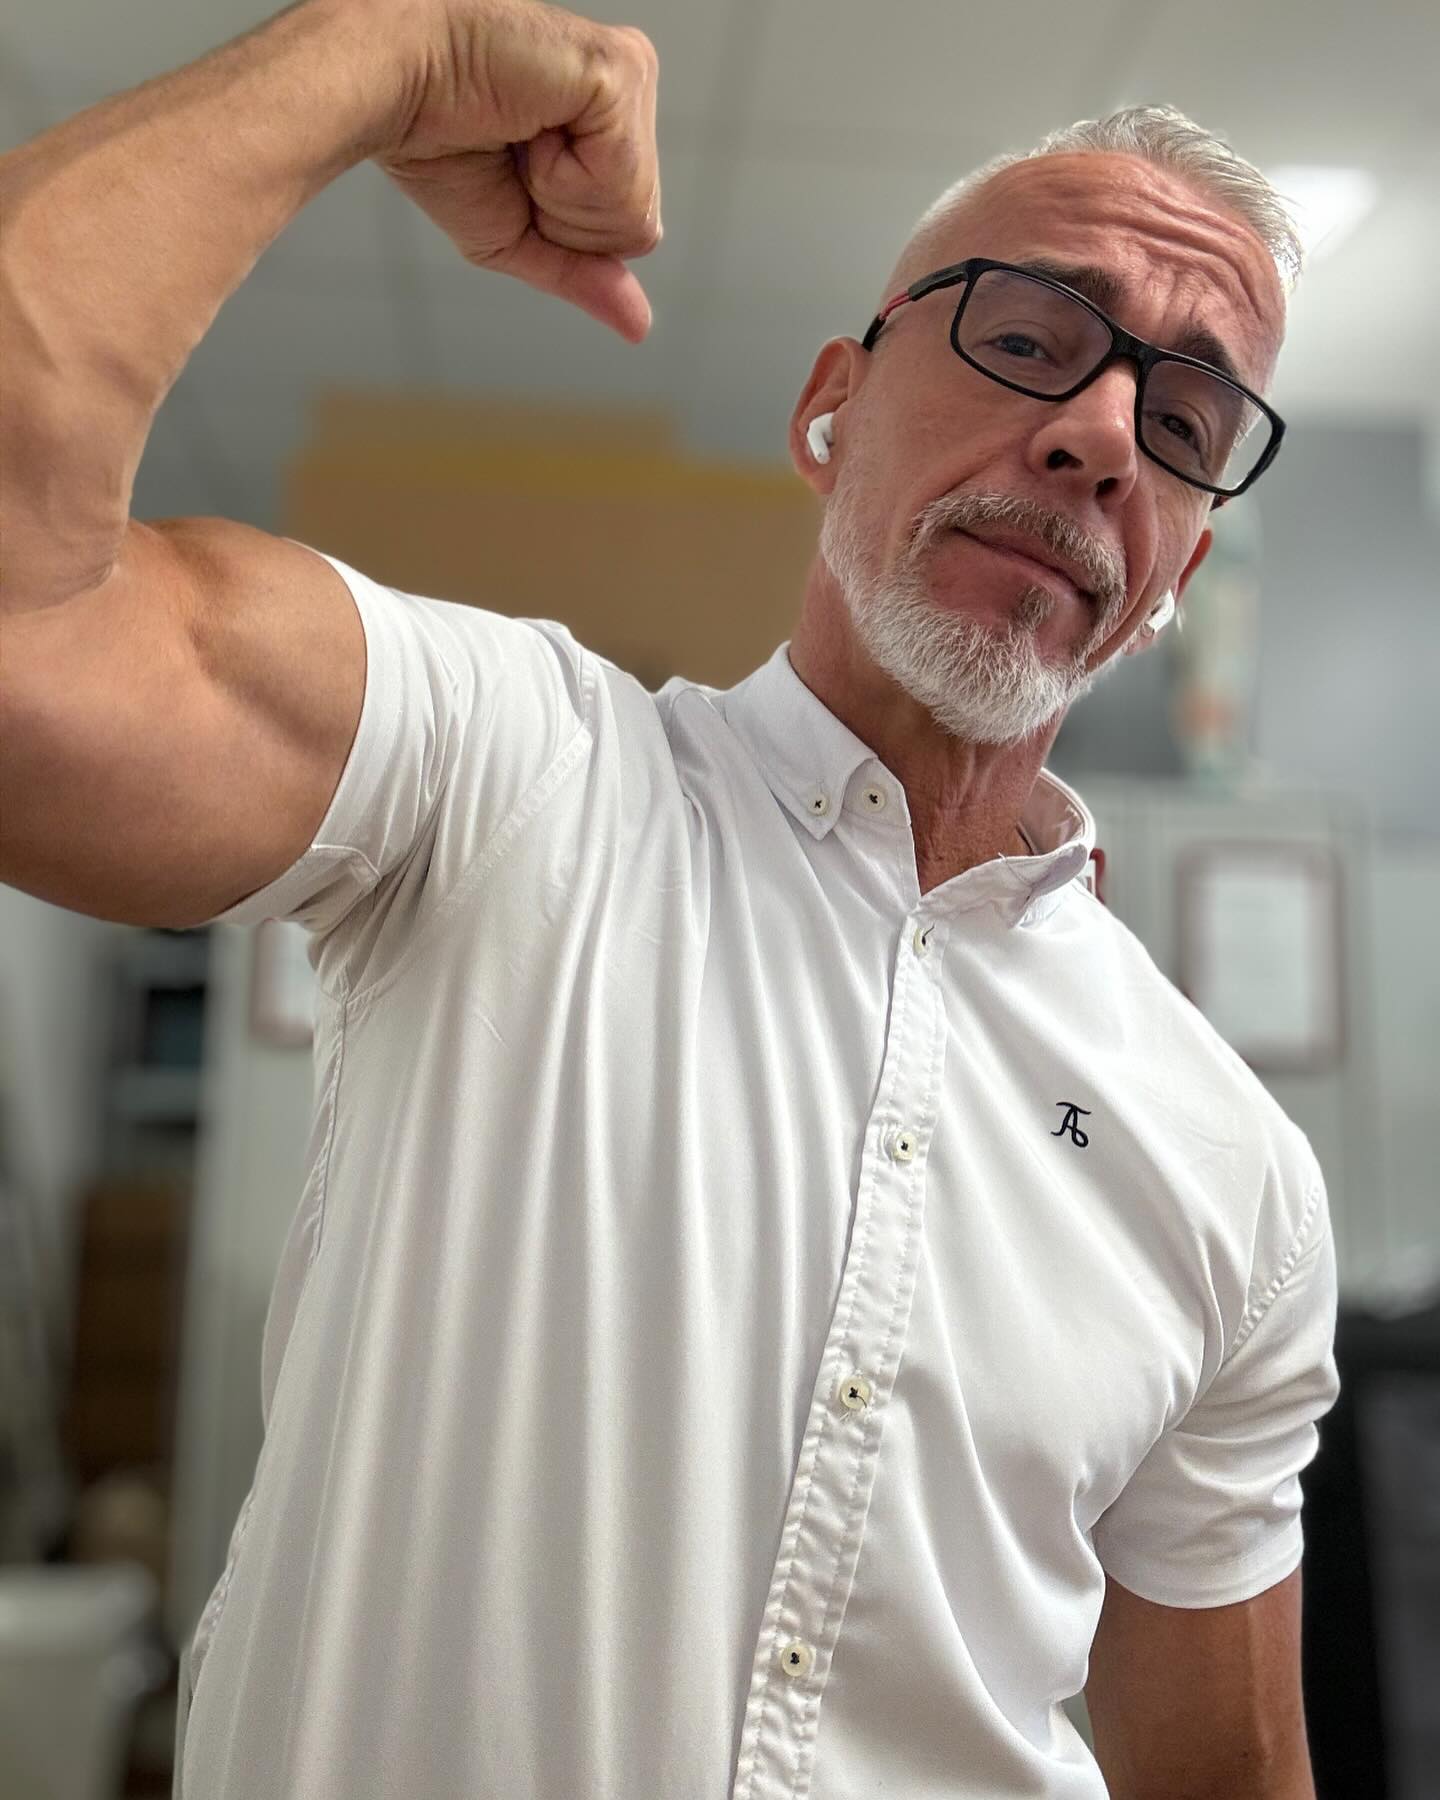 Can’t build muscle as a vegan? Let’s talk. 

#daddy #silverfox #vegan #fitover55 #gay #gayfit #veganfit #workoutmotivation